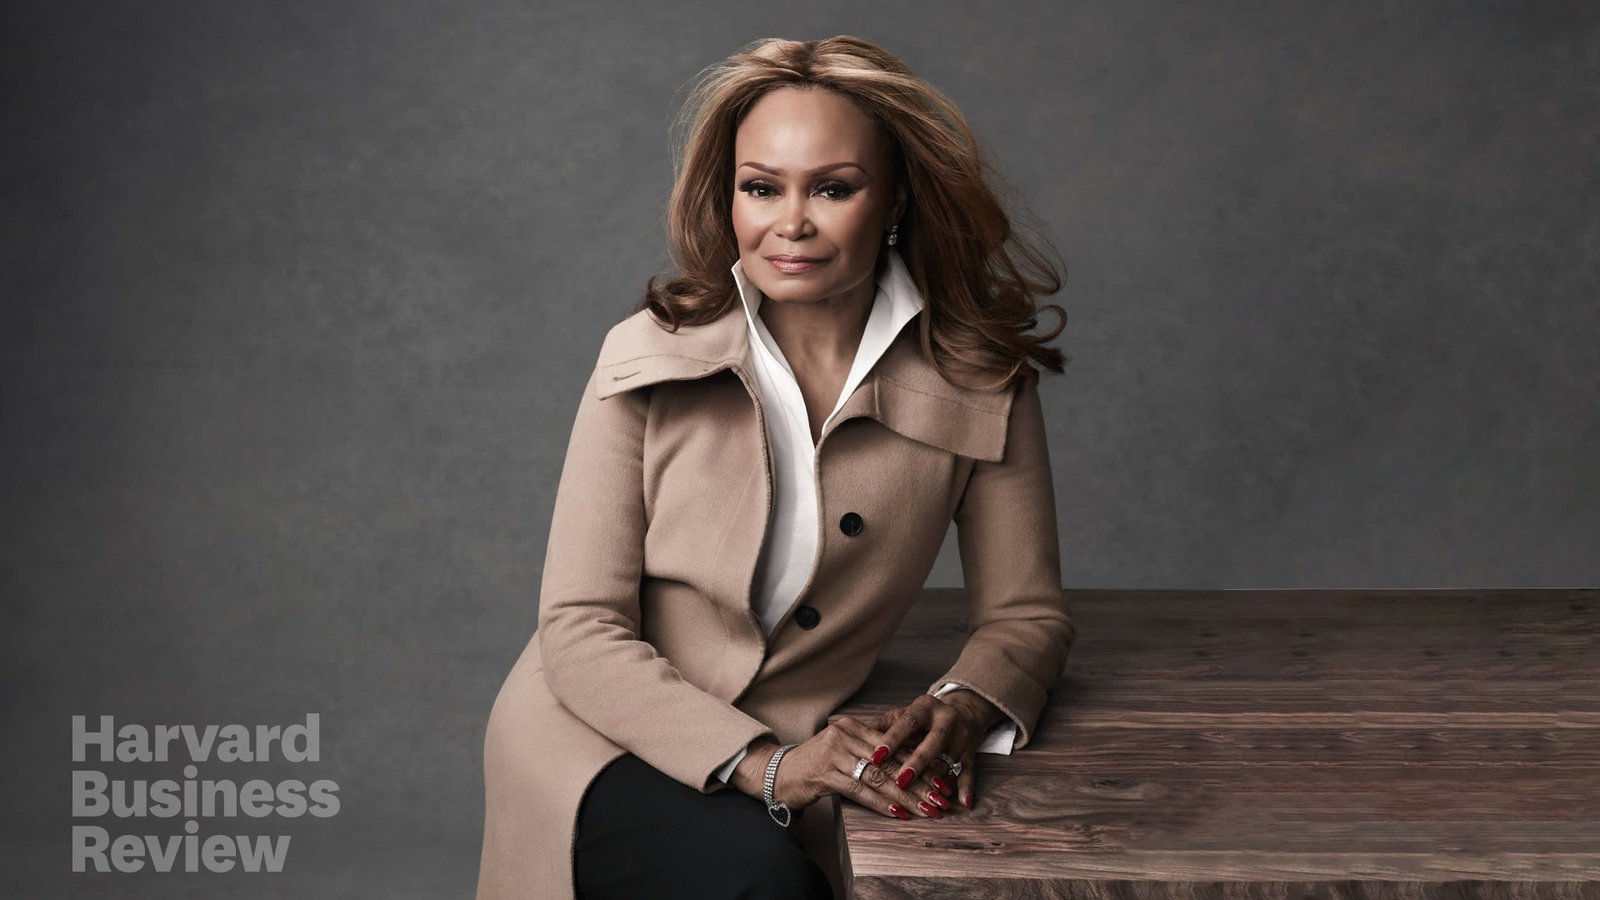 ActOne Group Founder Janice Bryant Howroyd: Never Compromise Your Values in a Quest to Succeed